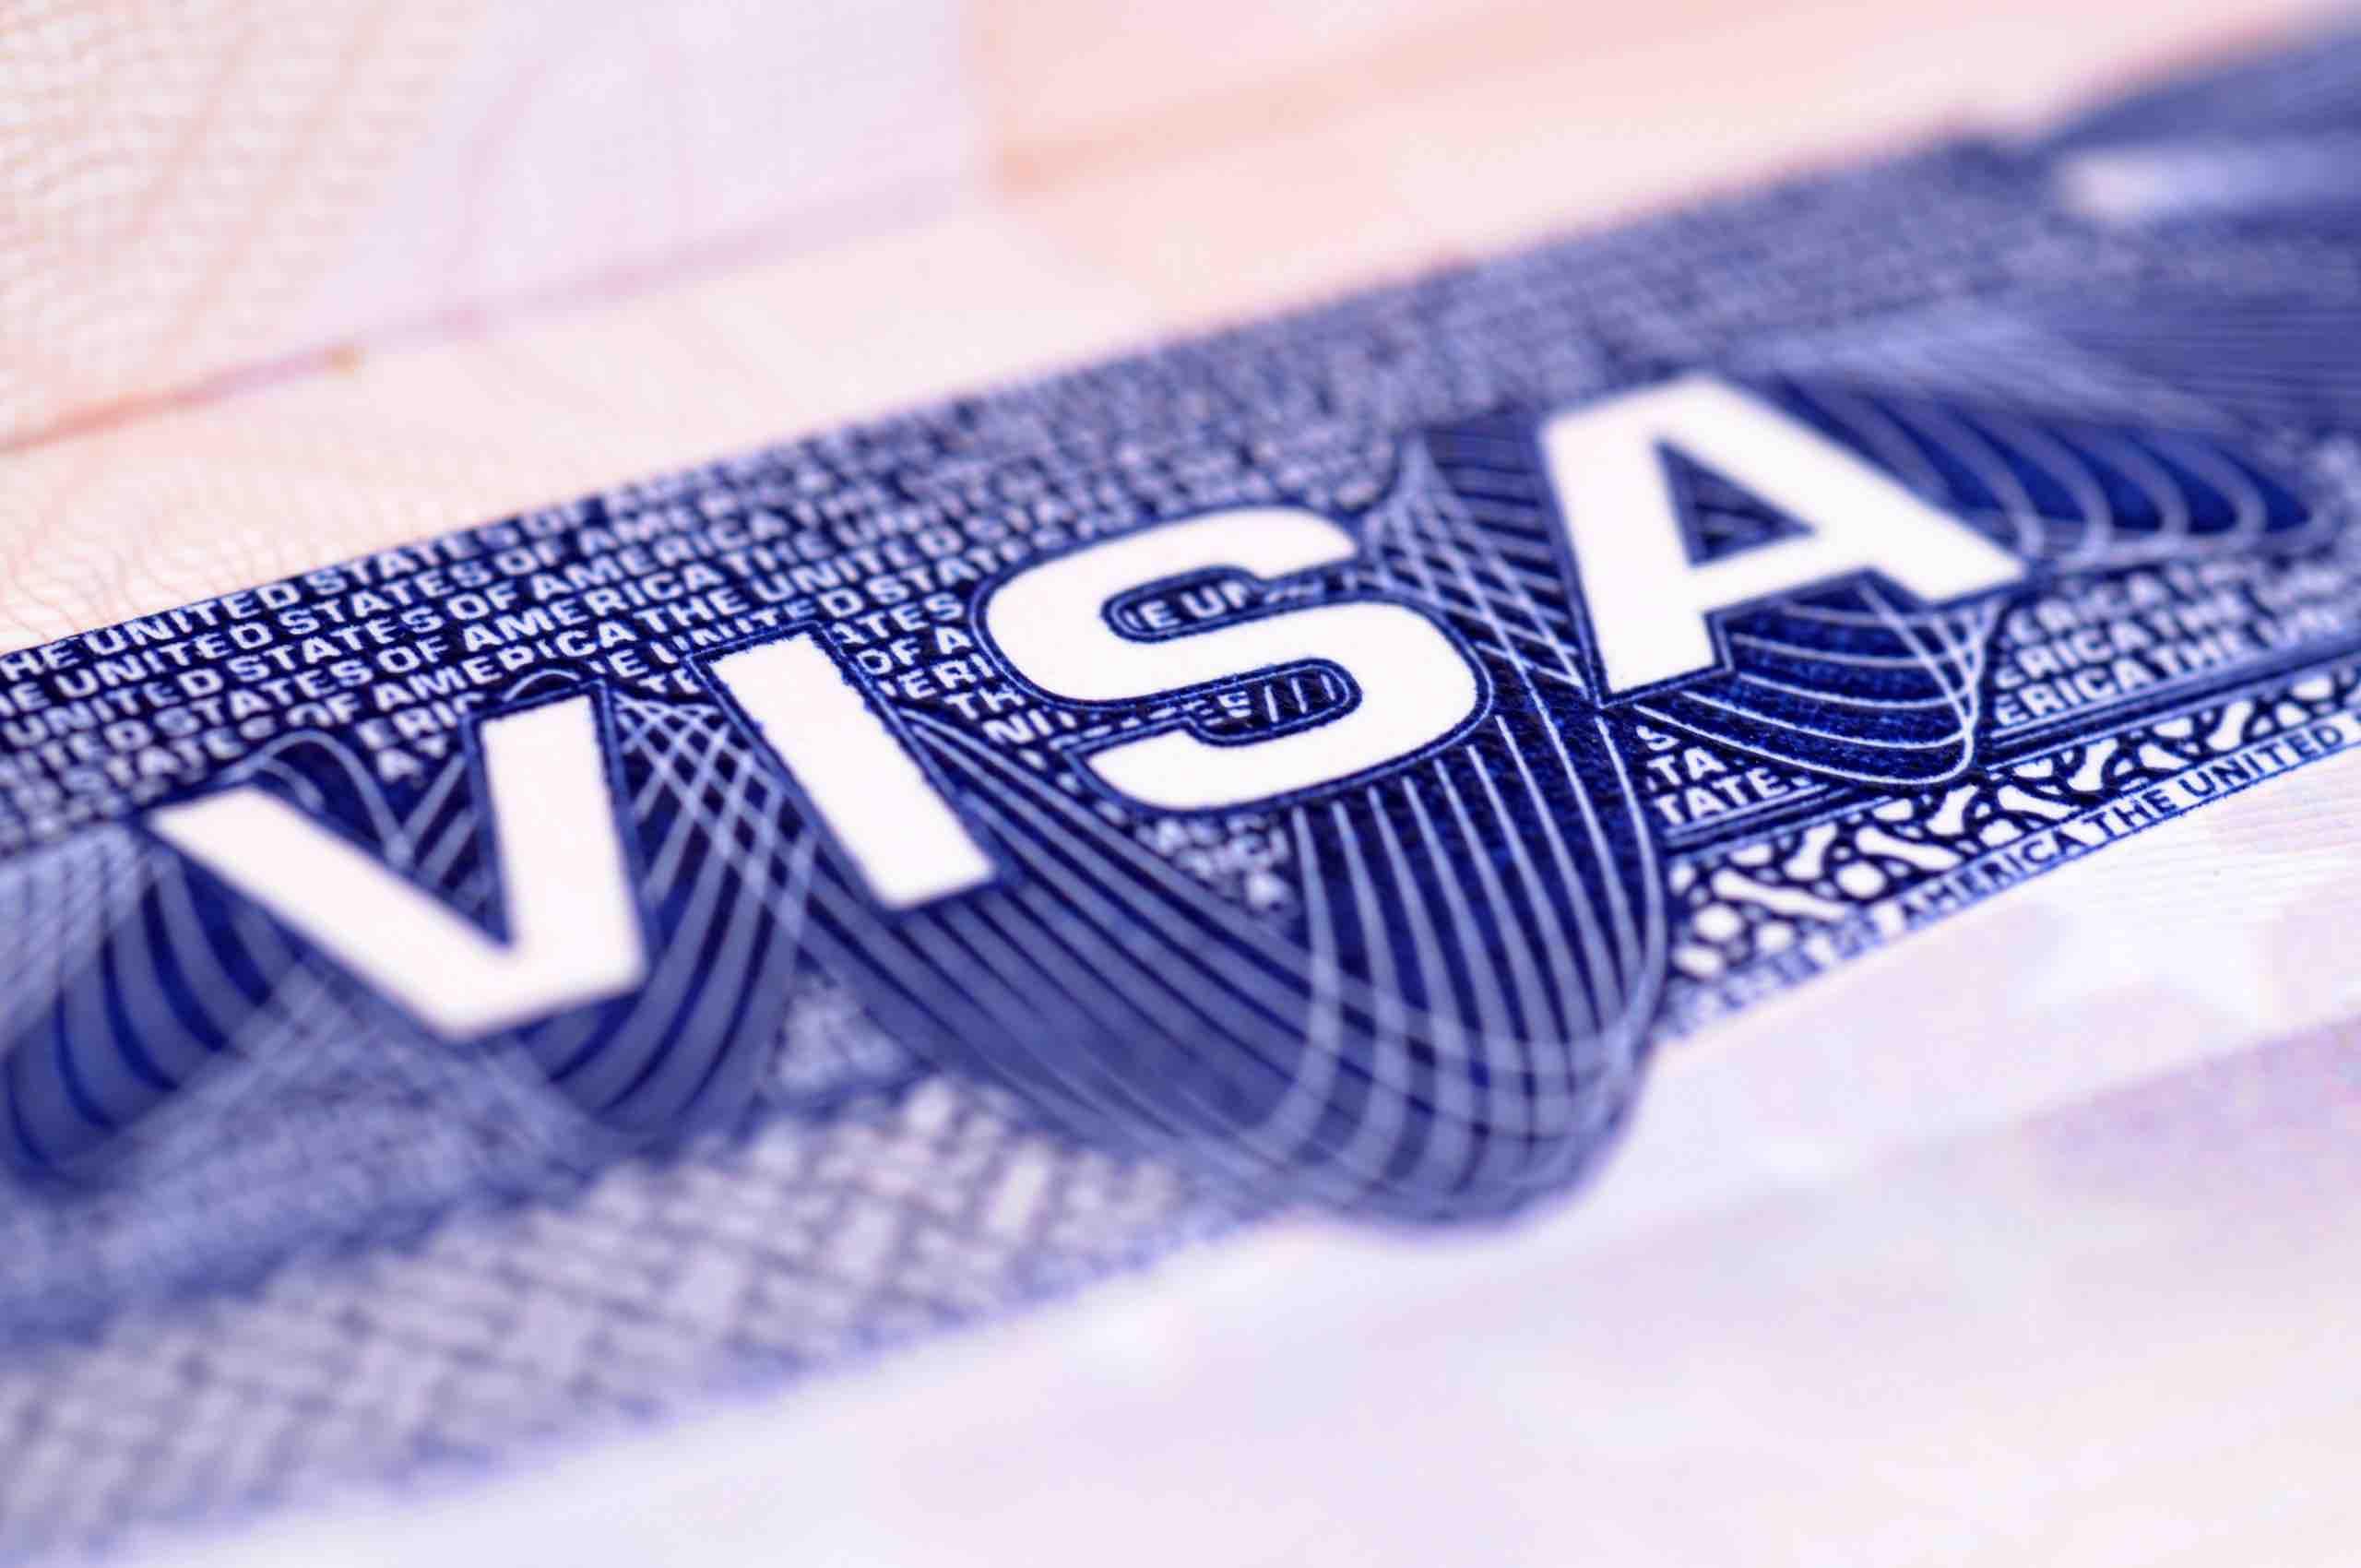 A unified Gulf visa is expected to roll out by 2025